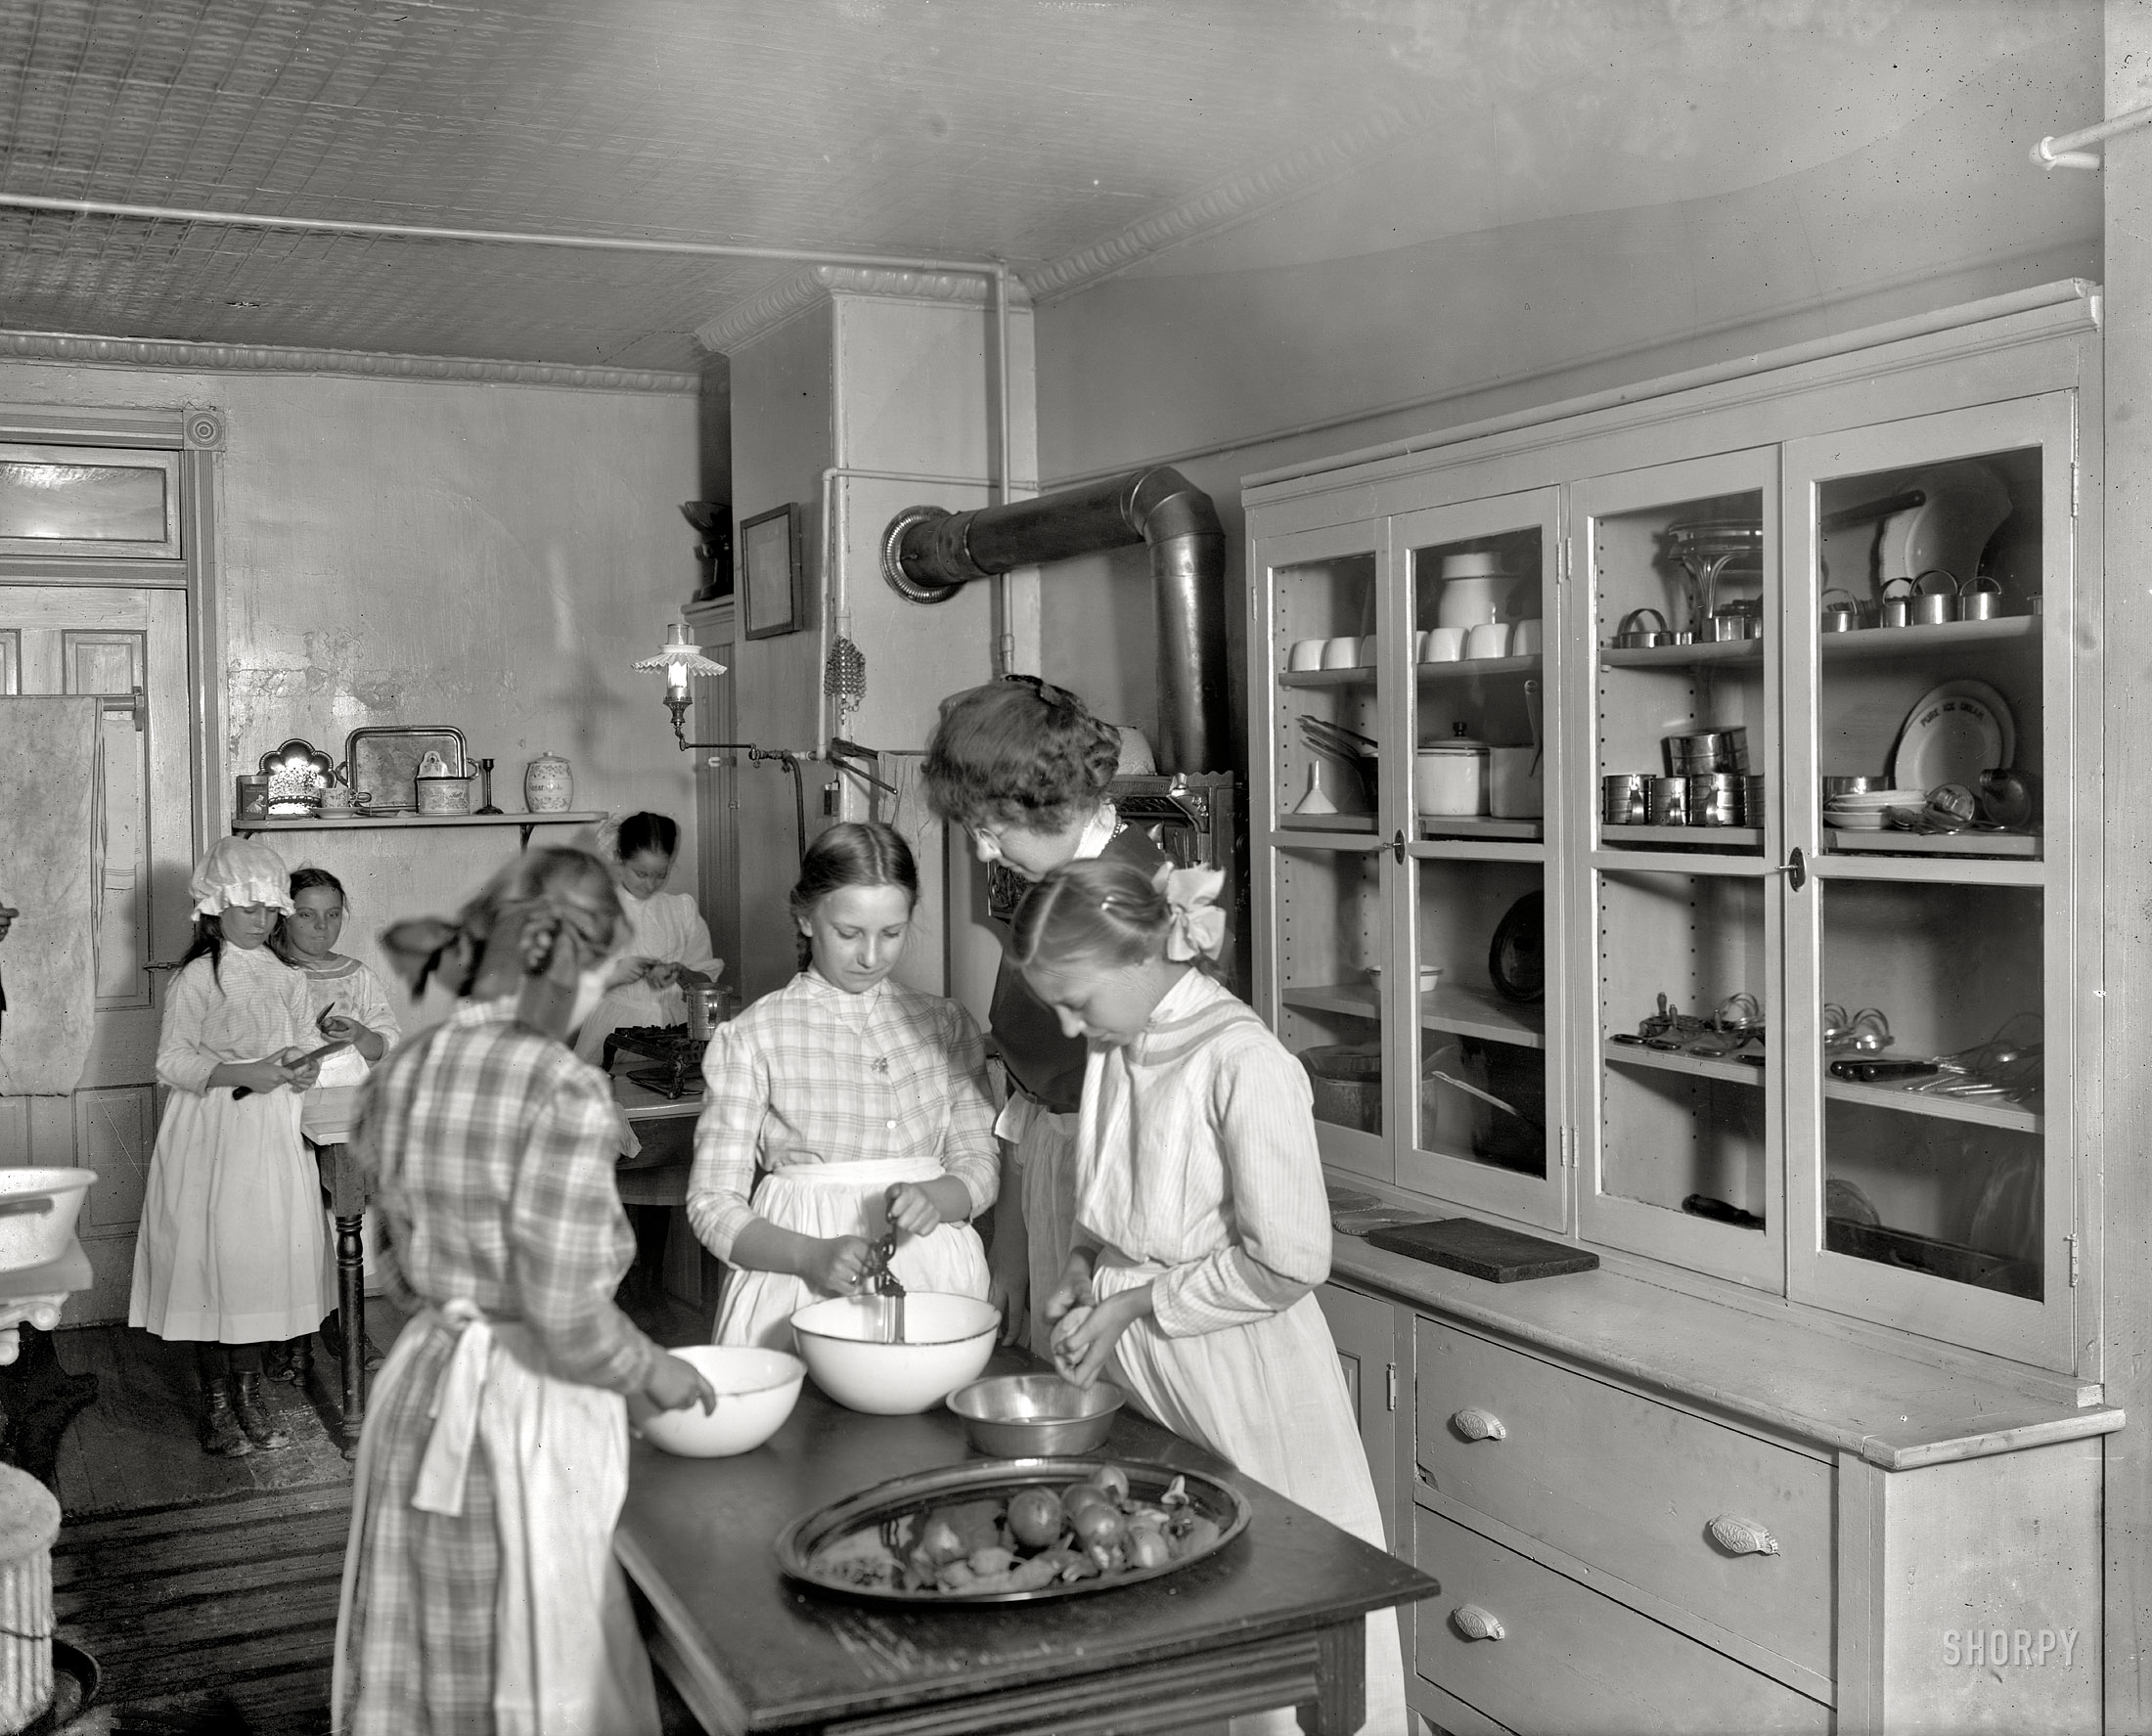 Circa 1912. "Neighborhood House kitchen." Our third look at this Washington, D.C., settlement house. Harris & Ewing Collection glass negative. View full size.